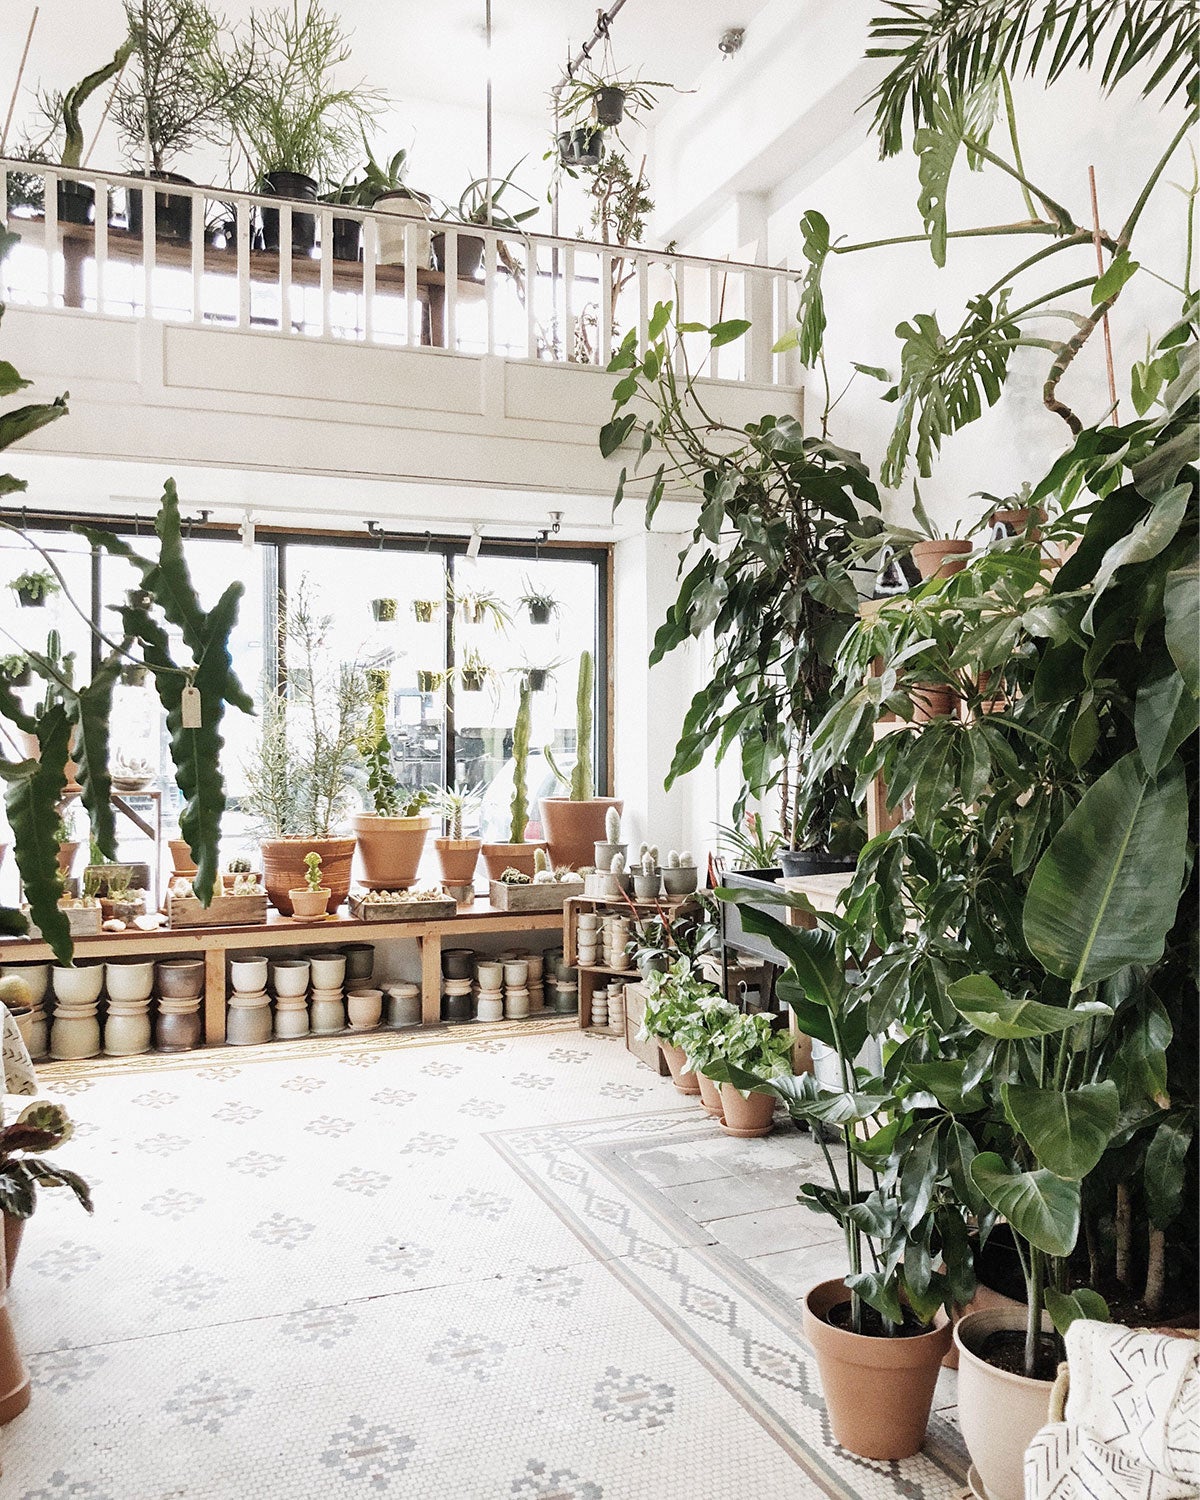 Inside of a small plant shop filled with greenery